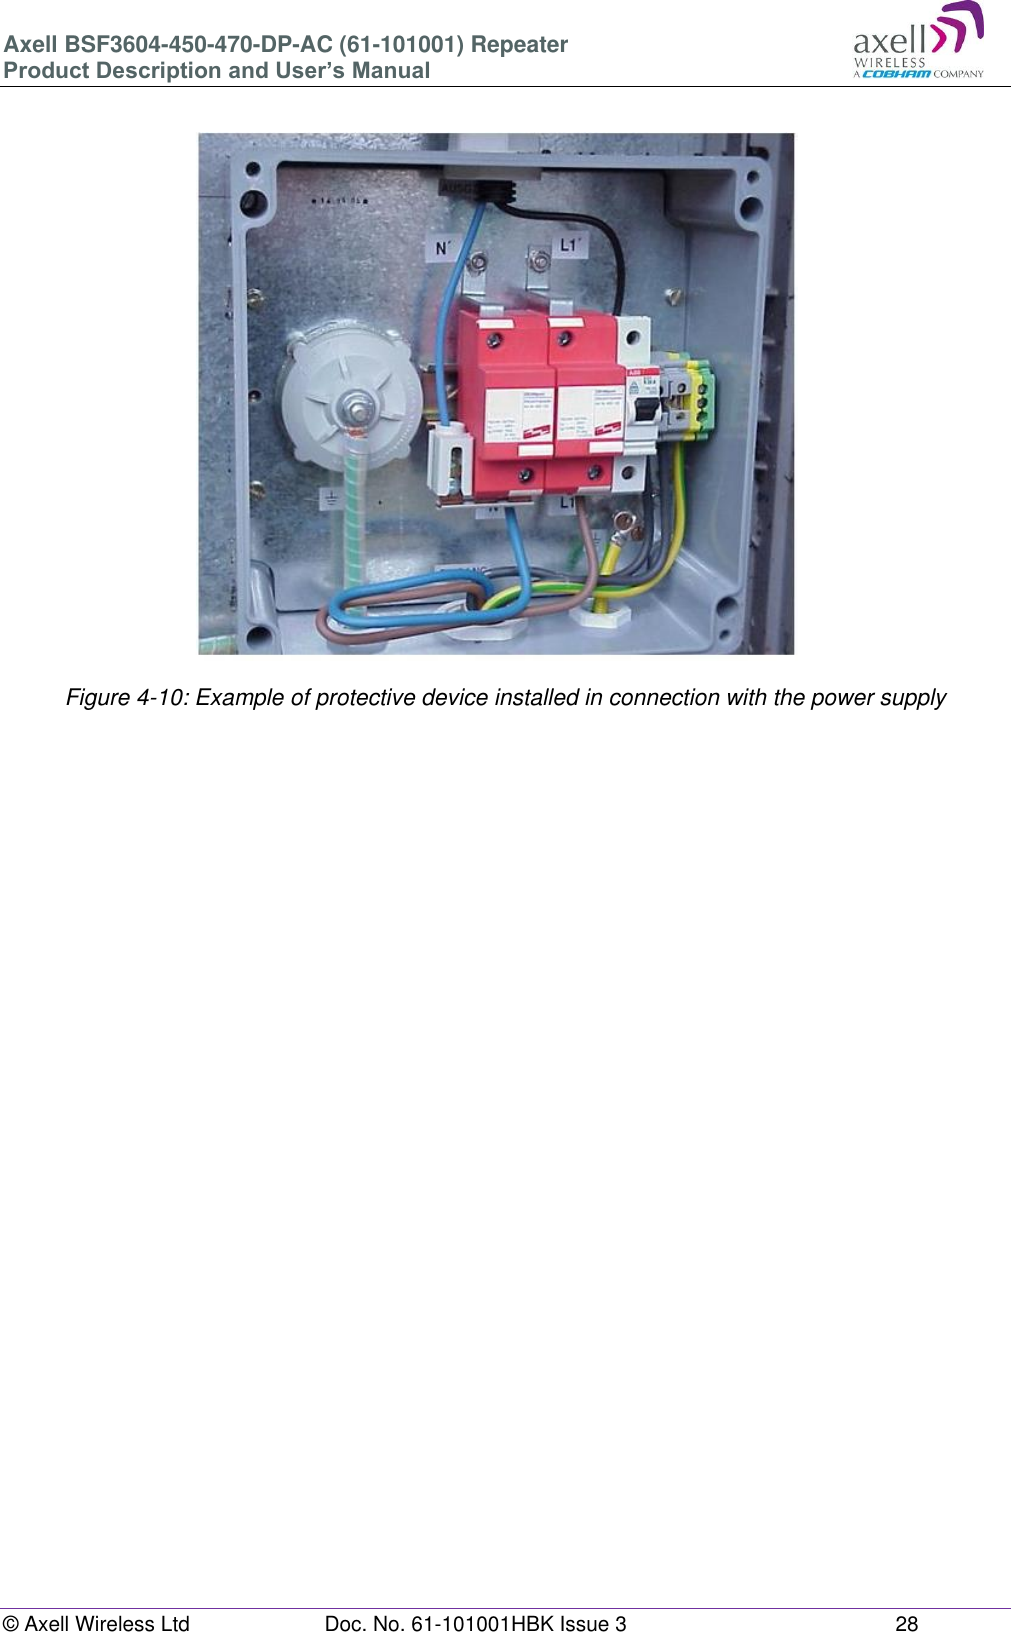 Axell BSF3604-450-470-DP-AC (61-101001) Repeater Product Description and User’s Manual © Axell Wireless Ltd  Doc. No. 61-101001HBK Issue 3  28                       Figure 4-10: Example of protective device installed in connection with the power supply         